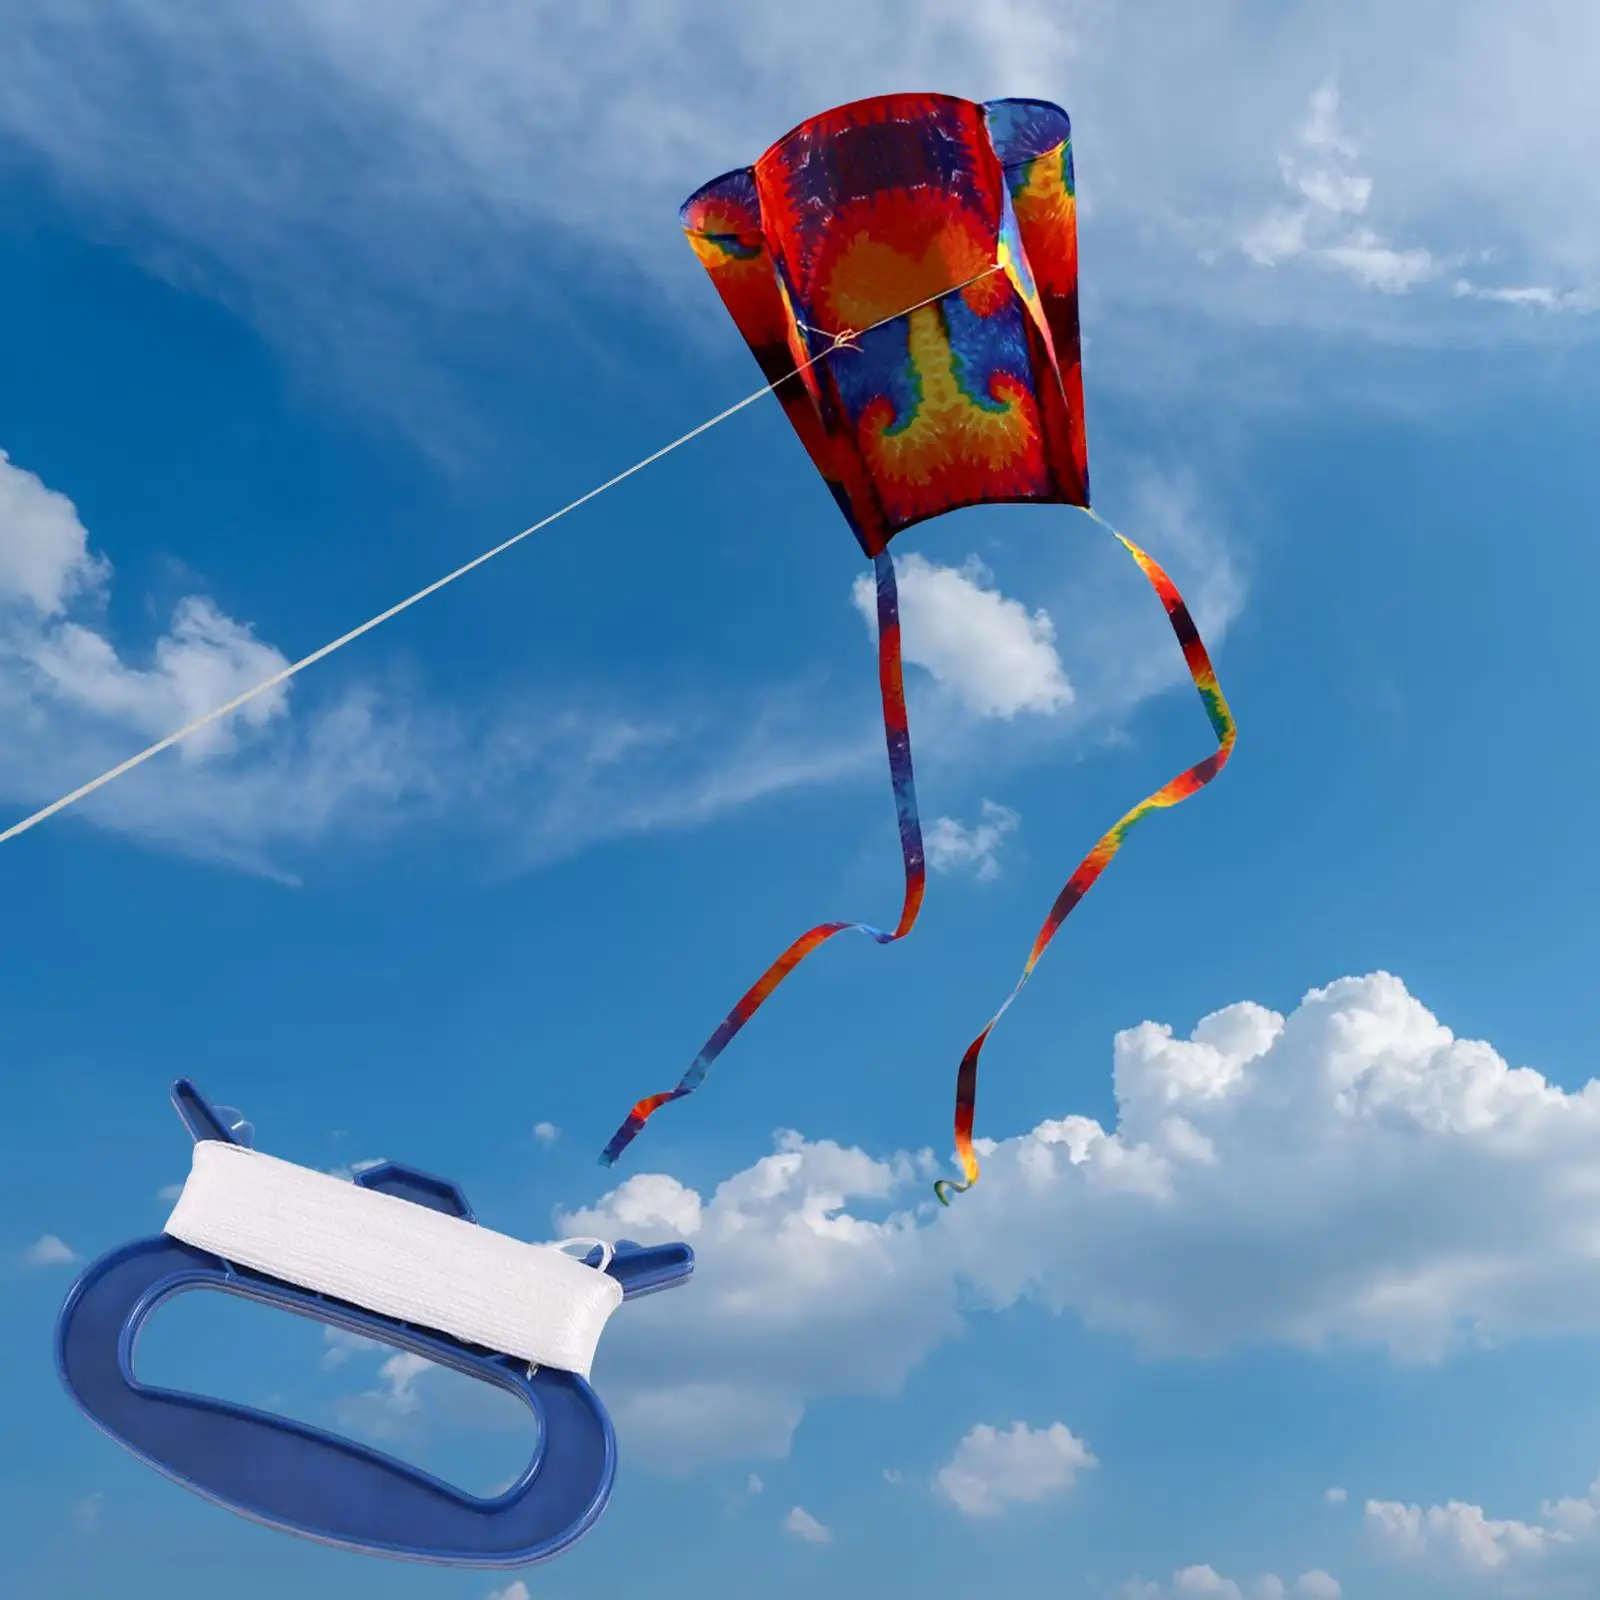 Rainbow Kite Outdoor Entertainment Sports for Kids Ages 4-8 Beginners Gifts